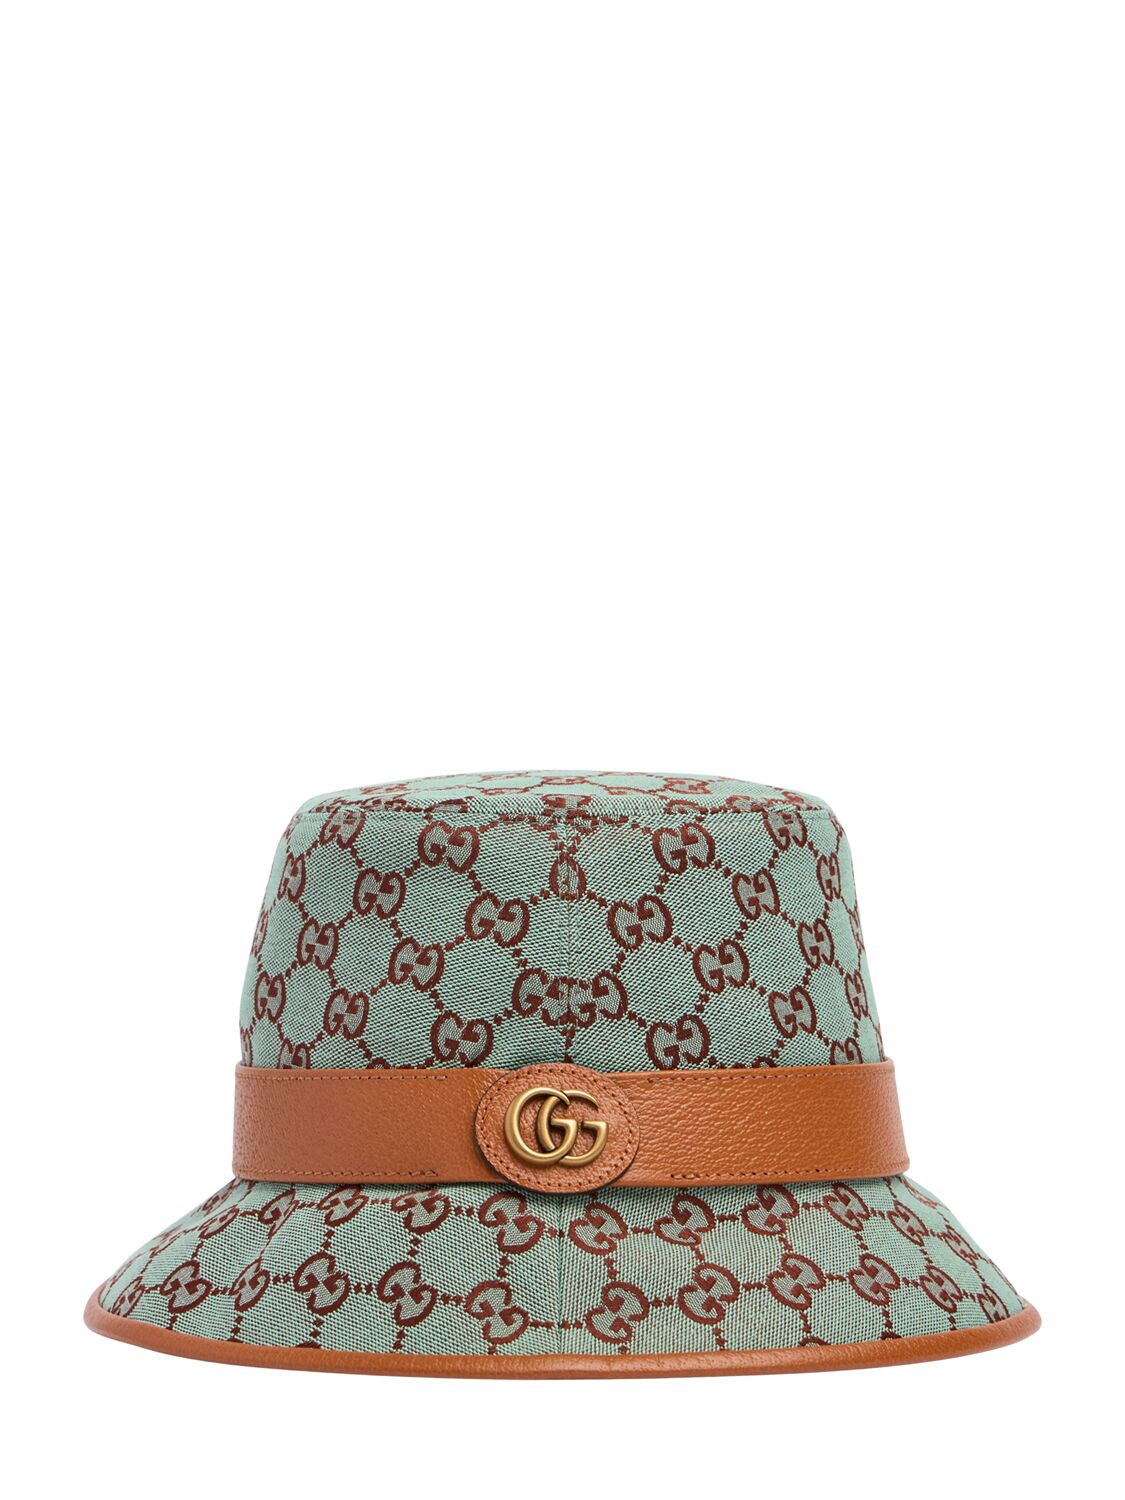 Image of New Gg Canvas Bucket Hat